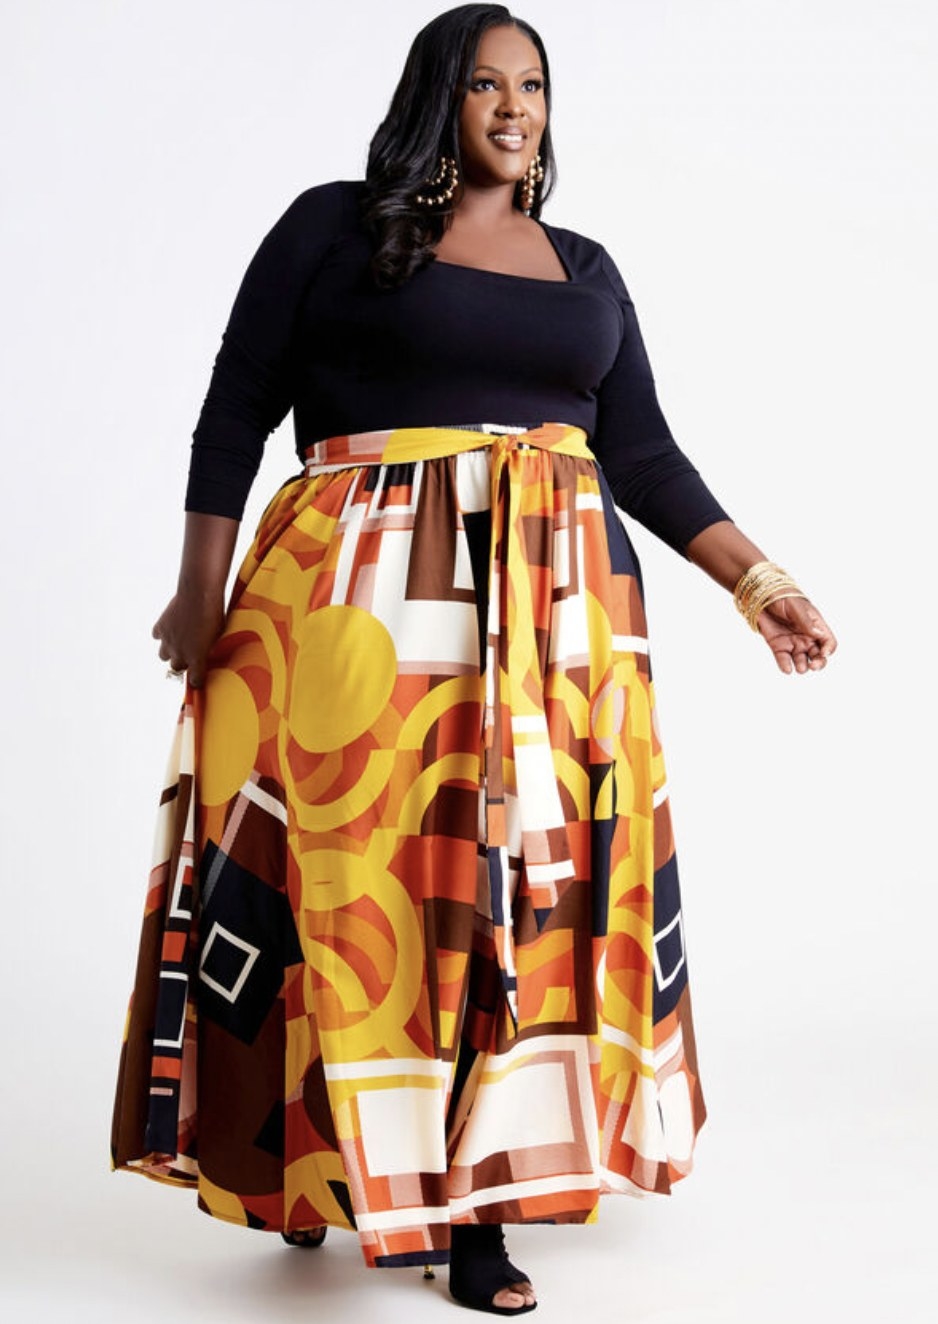 Model wearing the geometric orange and red toned print skirt with belt tied at waist, paired with black long sleeve tee